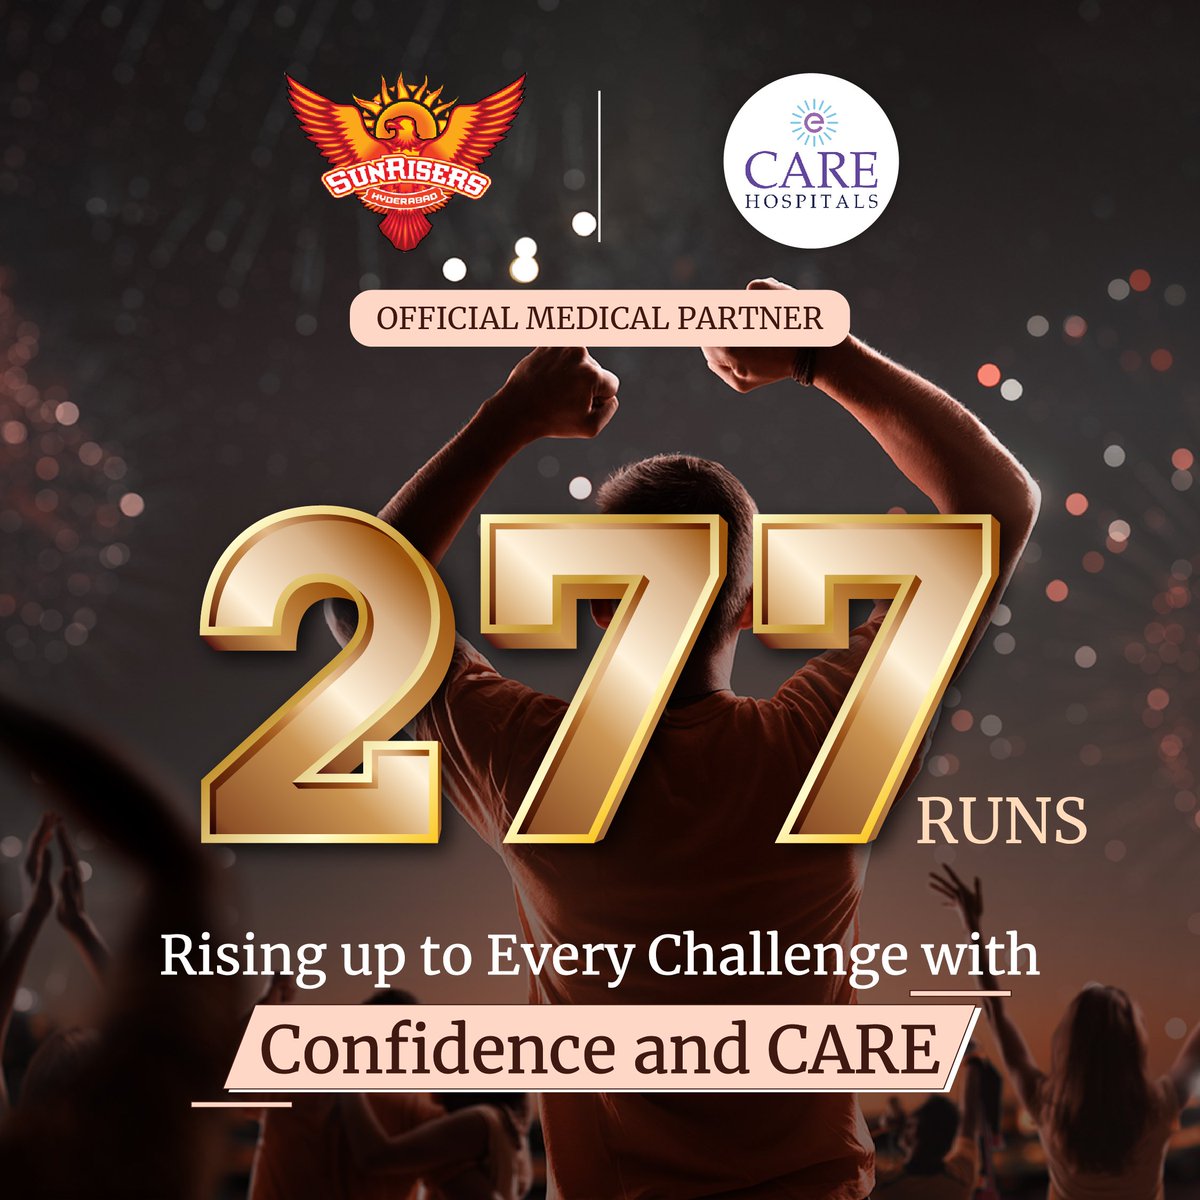 Hats off to Sunrisers Hyderabad for their historic world record of 277 runs. We are proud as your Official Medical Partner as you smash boundaries with unstoppable confidence! Keep thriving because we are here to take care! #CAREHospitals #SunrisersHyderabad #IPL2024 #IPLUpdate